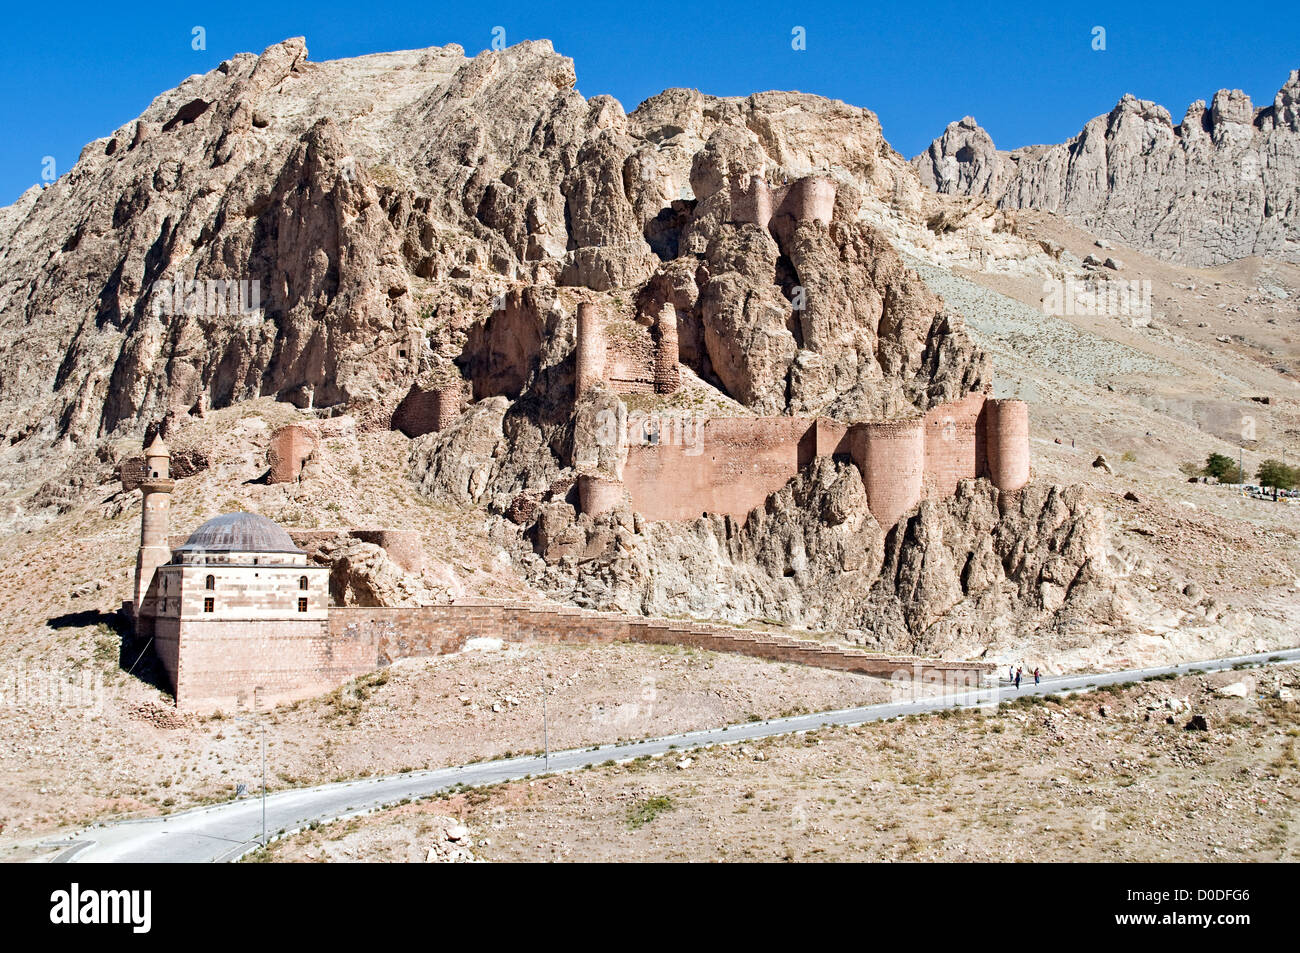 The ancient Urartian fortress and mosque of old Beyazit near the Turkish border with Iran, near Dogubeyazit, eastern Anatolia, Turkey. Stock Photo